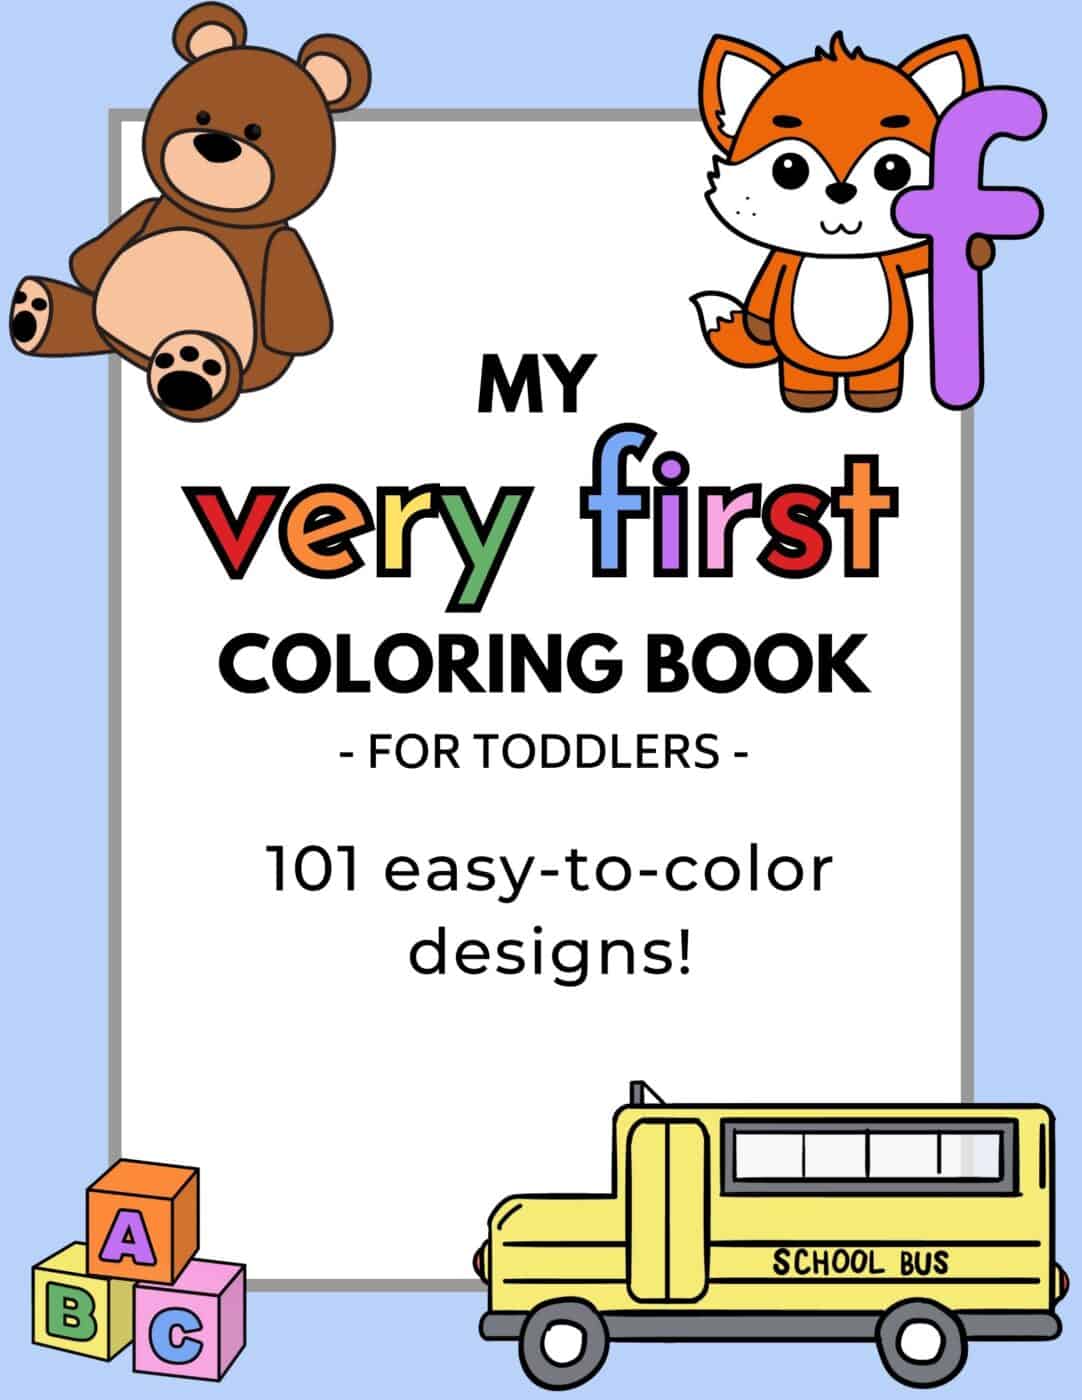 First coloring book - front page